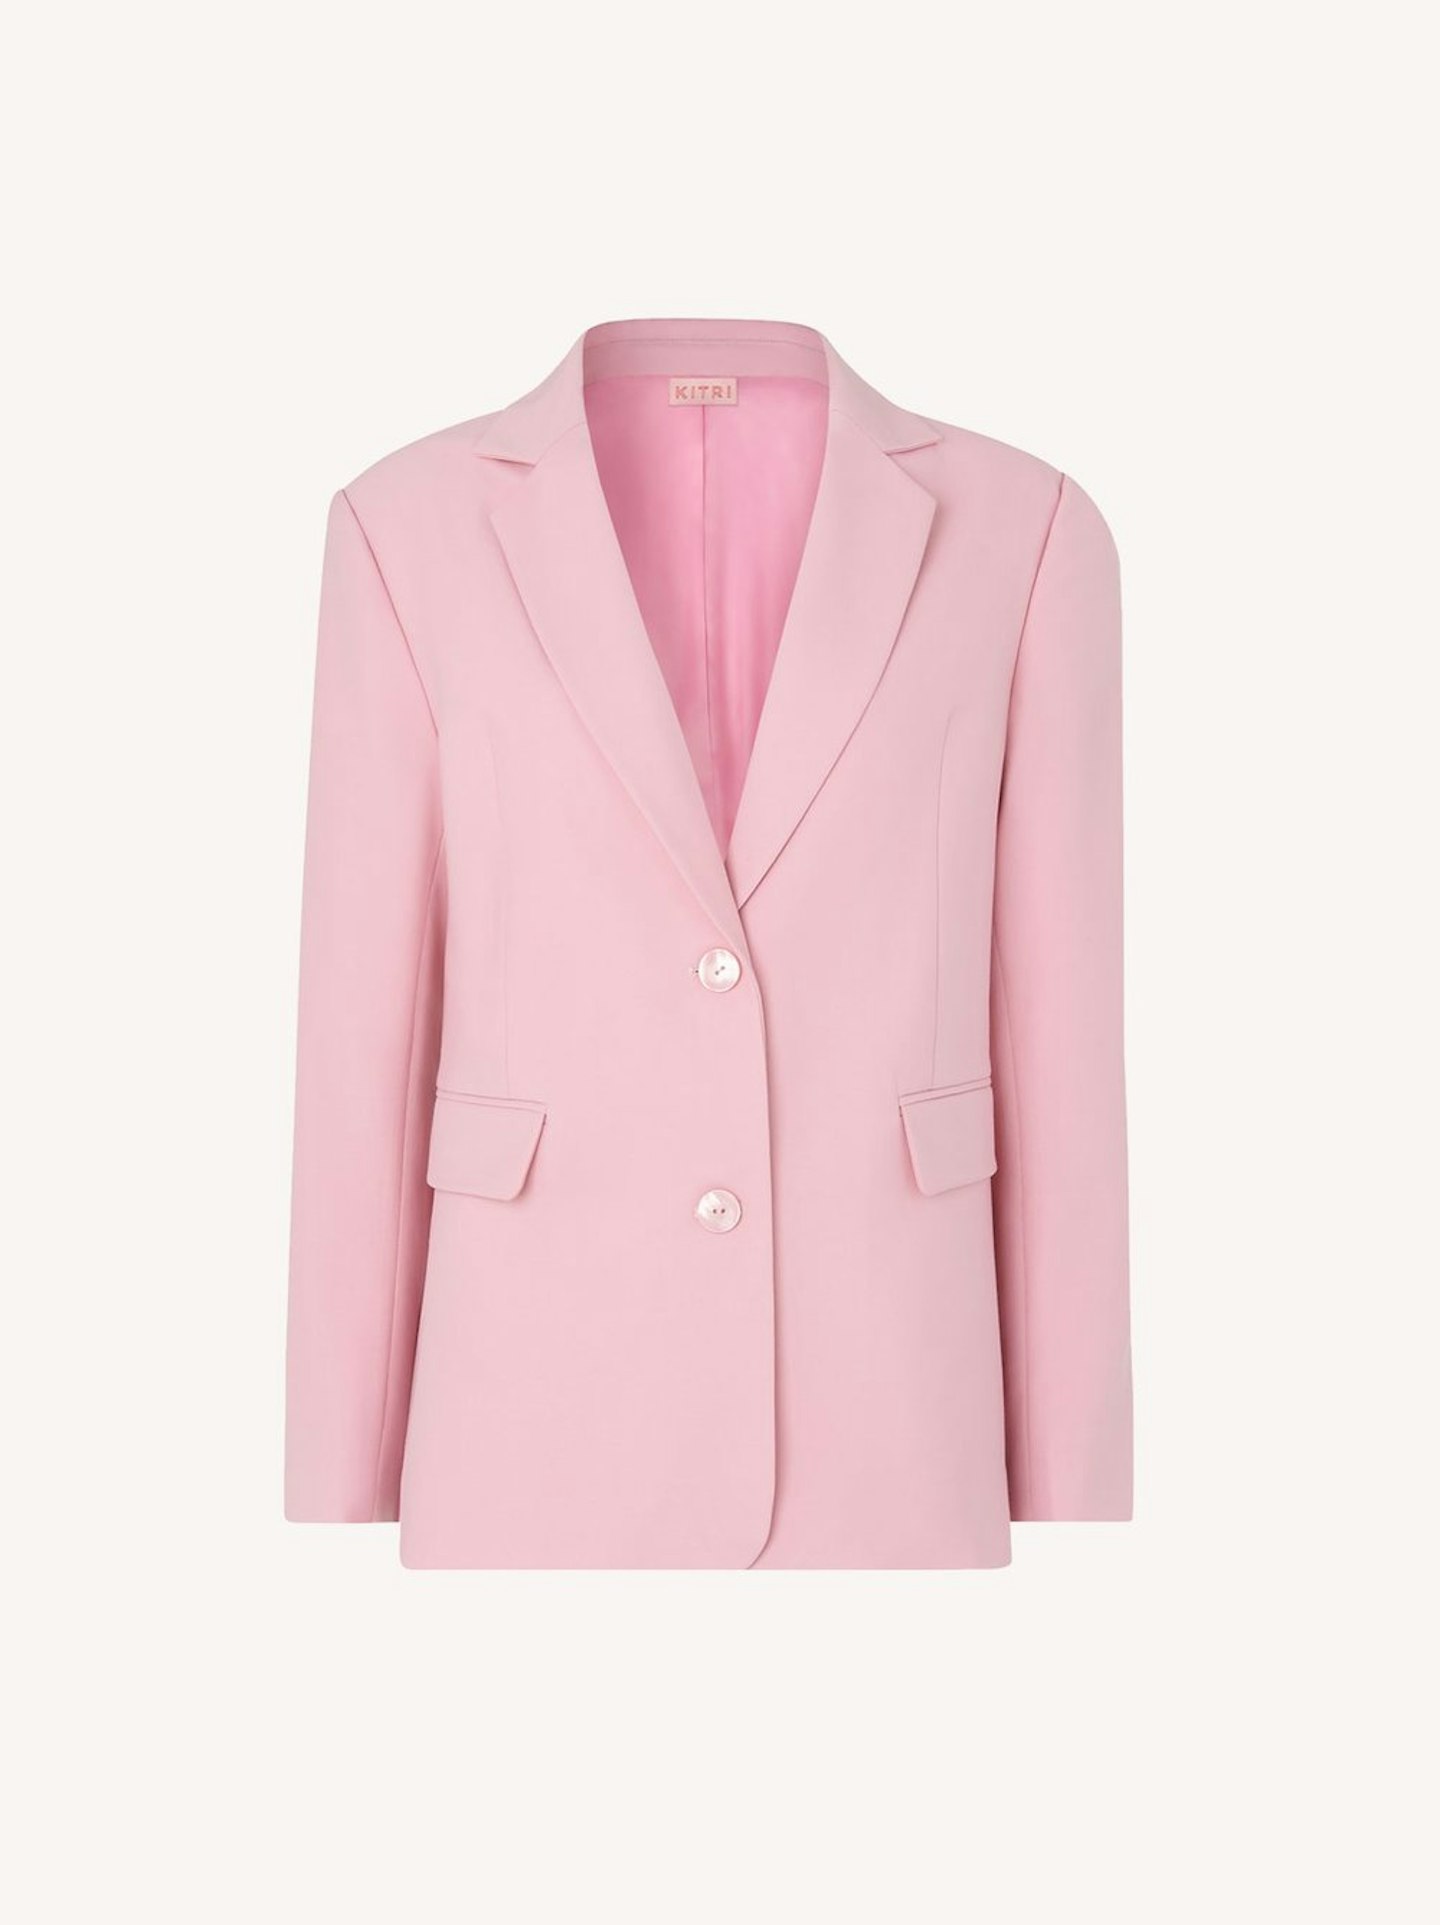 Laurie Pink Oversized Blazer, £165